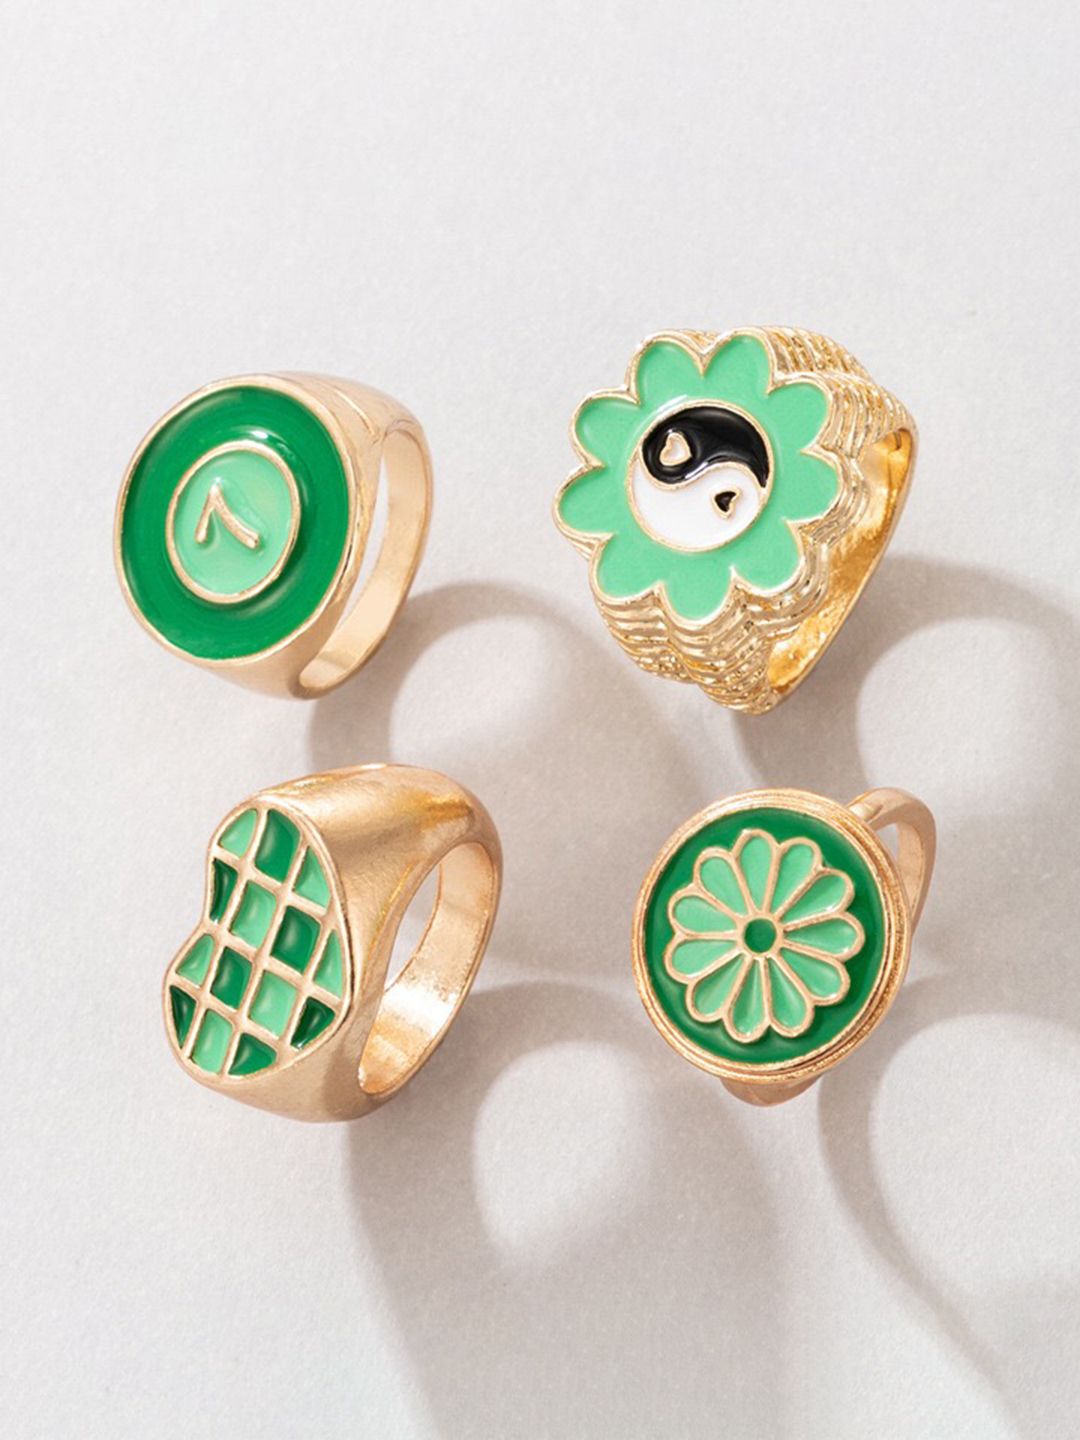 YouBella Set Of 4 Gold-Plated Green & White Enamelled Finger Rings Price in India